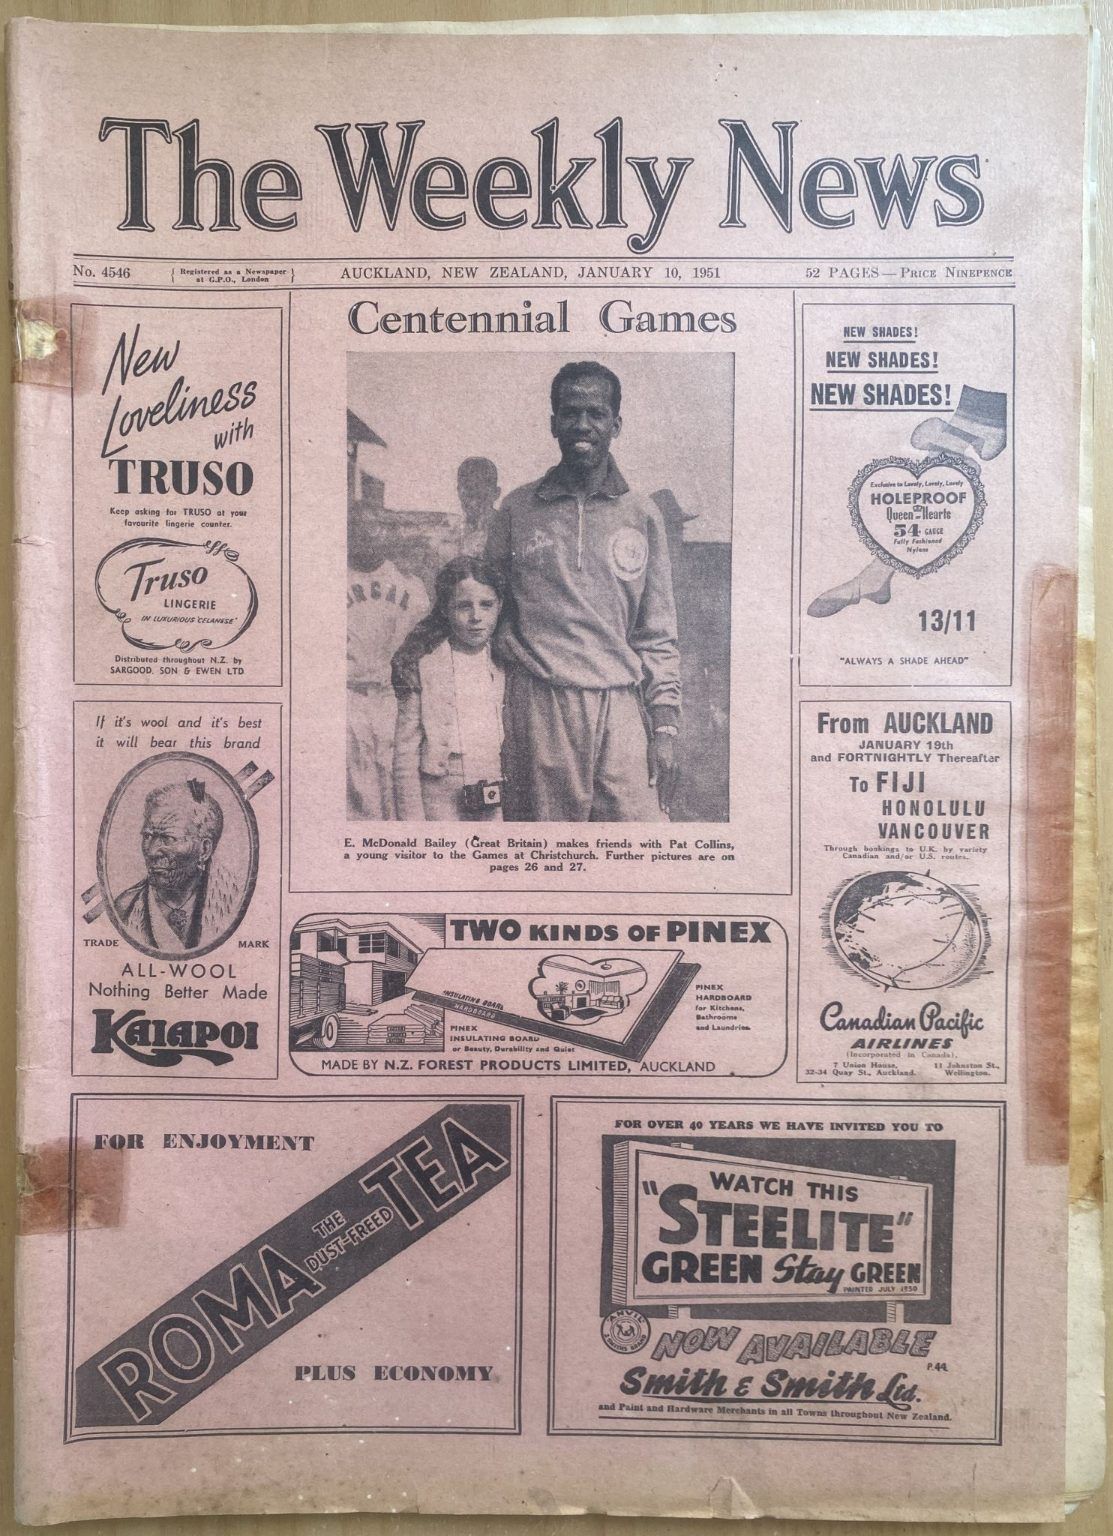 OLD NEWSPAPER: The Weekly News, No. 4546, 10 January 1951